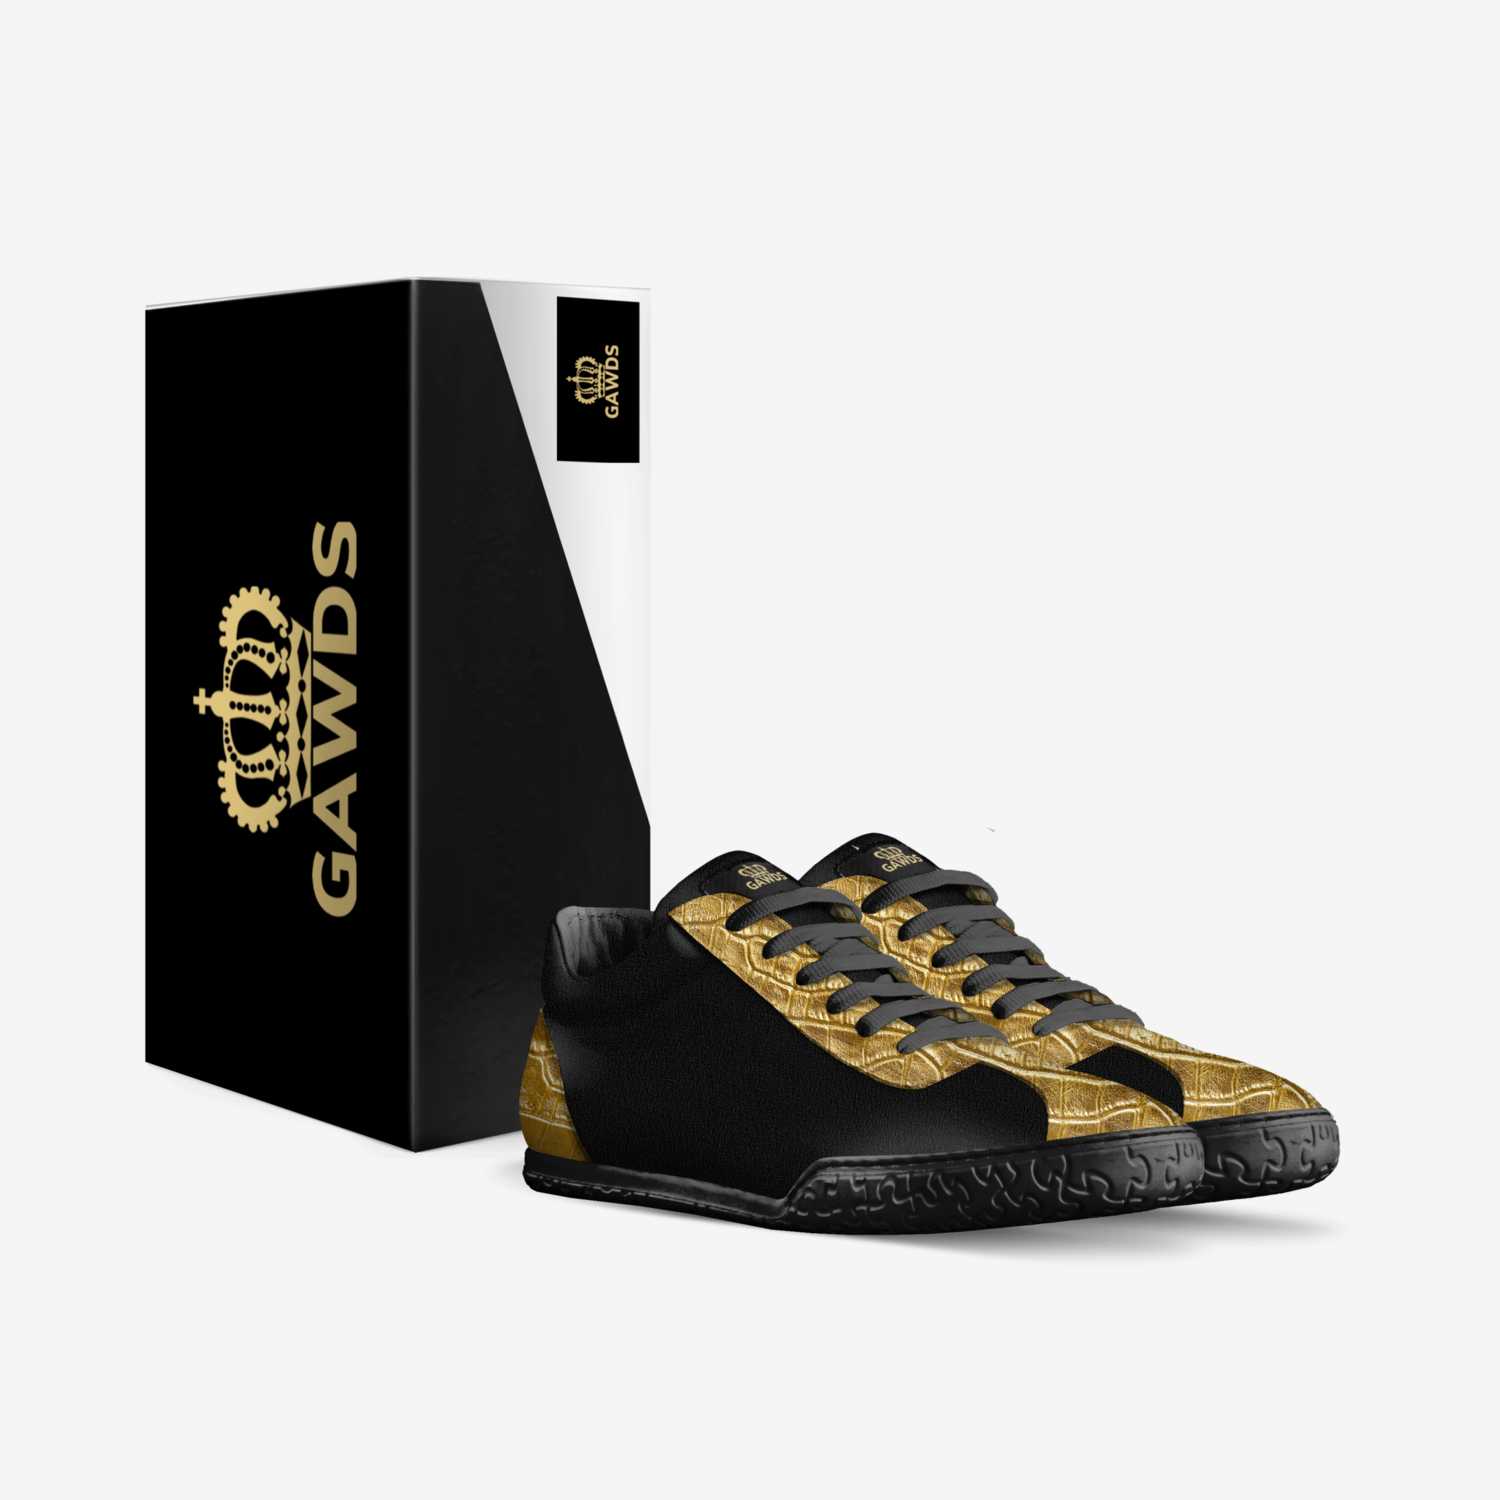 GAWDS custom made in Italy shoes by Crisis Fresh | Box view